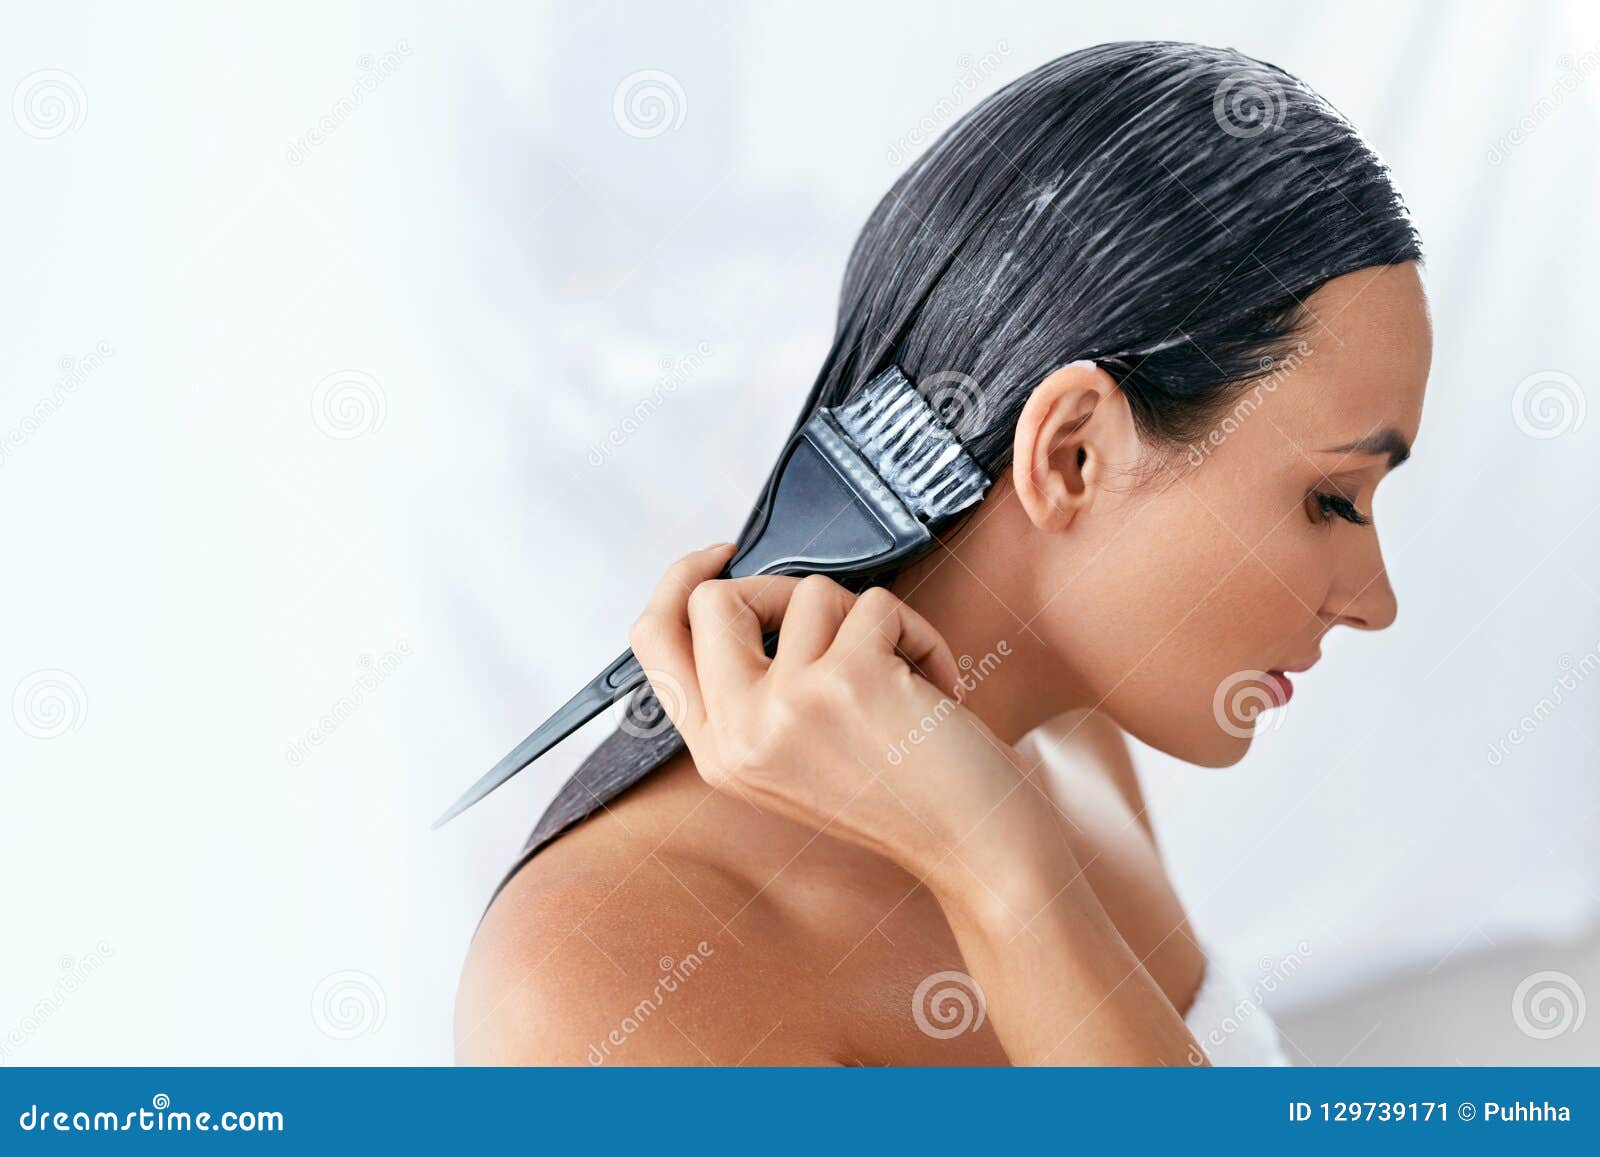 hair mask. woman applying conditioner on long hair with brush, hair care treatment